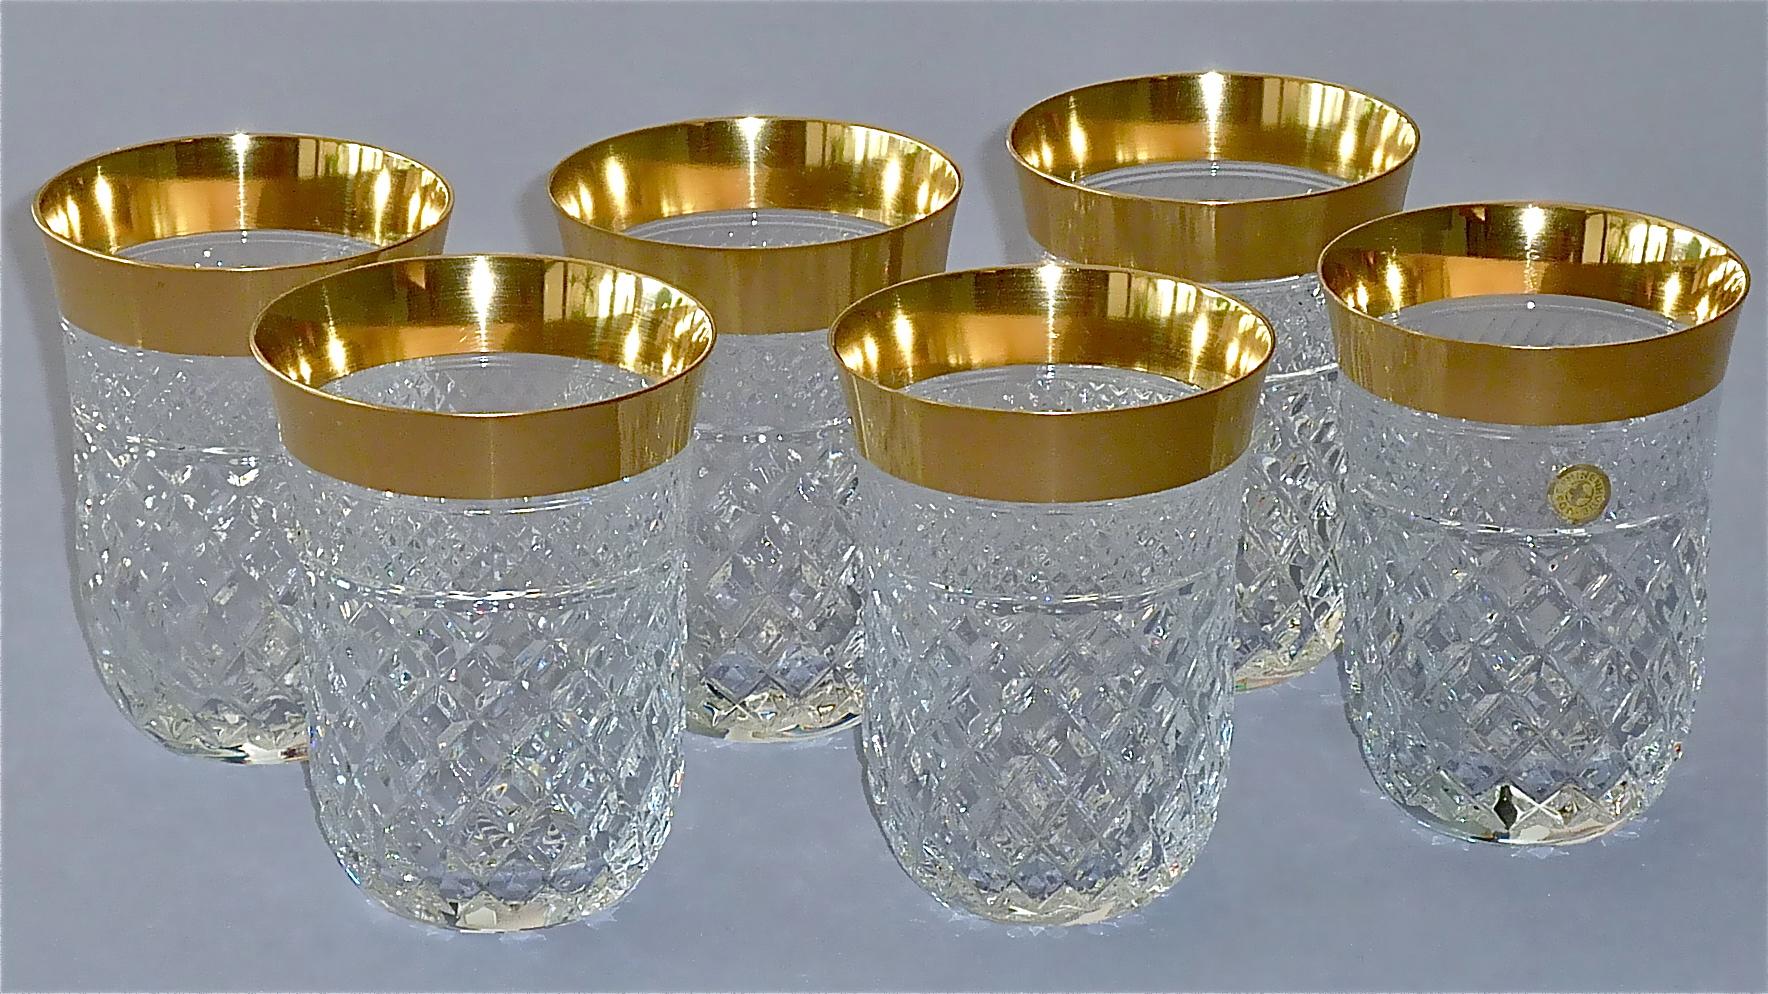 Gorgeous 20th century handcrafted faceted crystal glass set with 24-carat gold rim made by Josephinenhütte Moser circa 1960-1970 and very in the style of the exclusive French company Baccarat or Saint Louis thistle. This exquisite set of 6 water